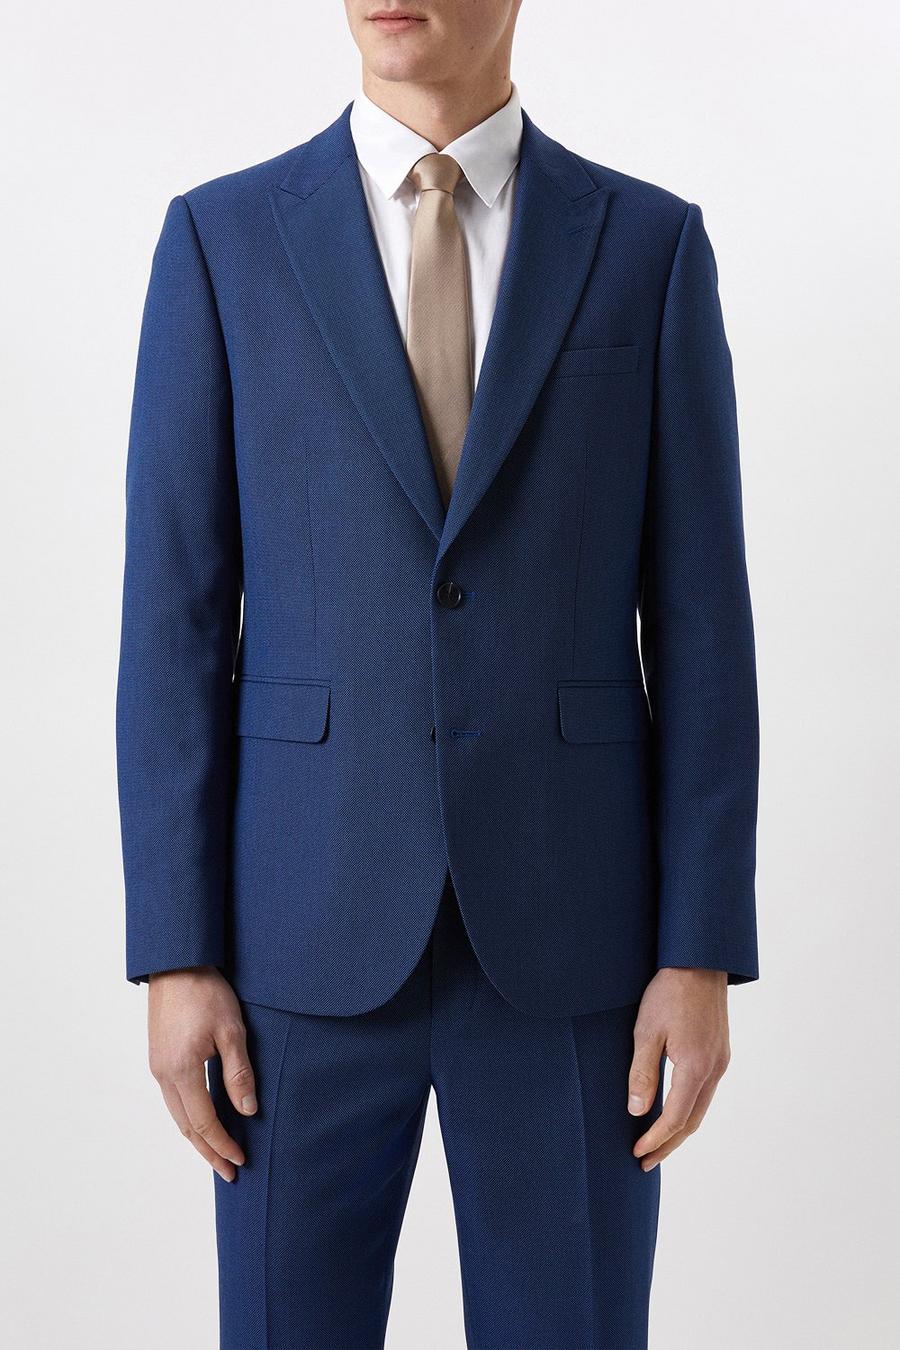 Plus And Tall Slim Fit Blue Birdseye Suit Jacket